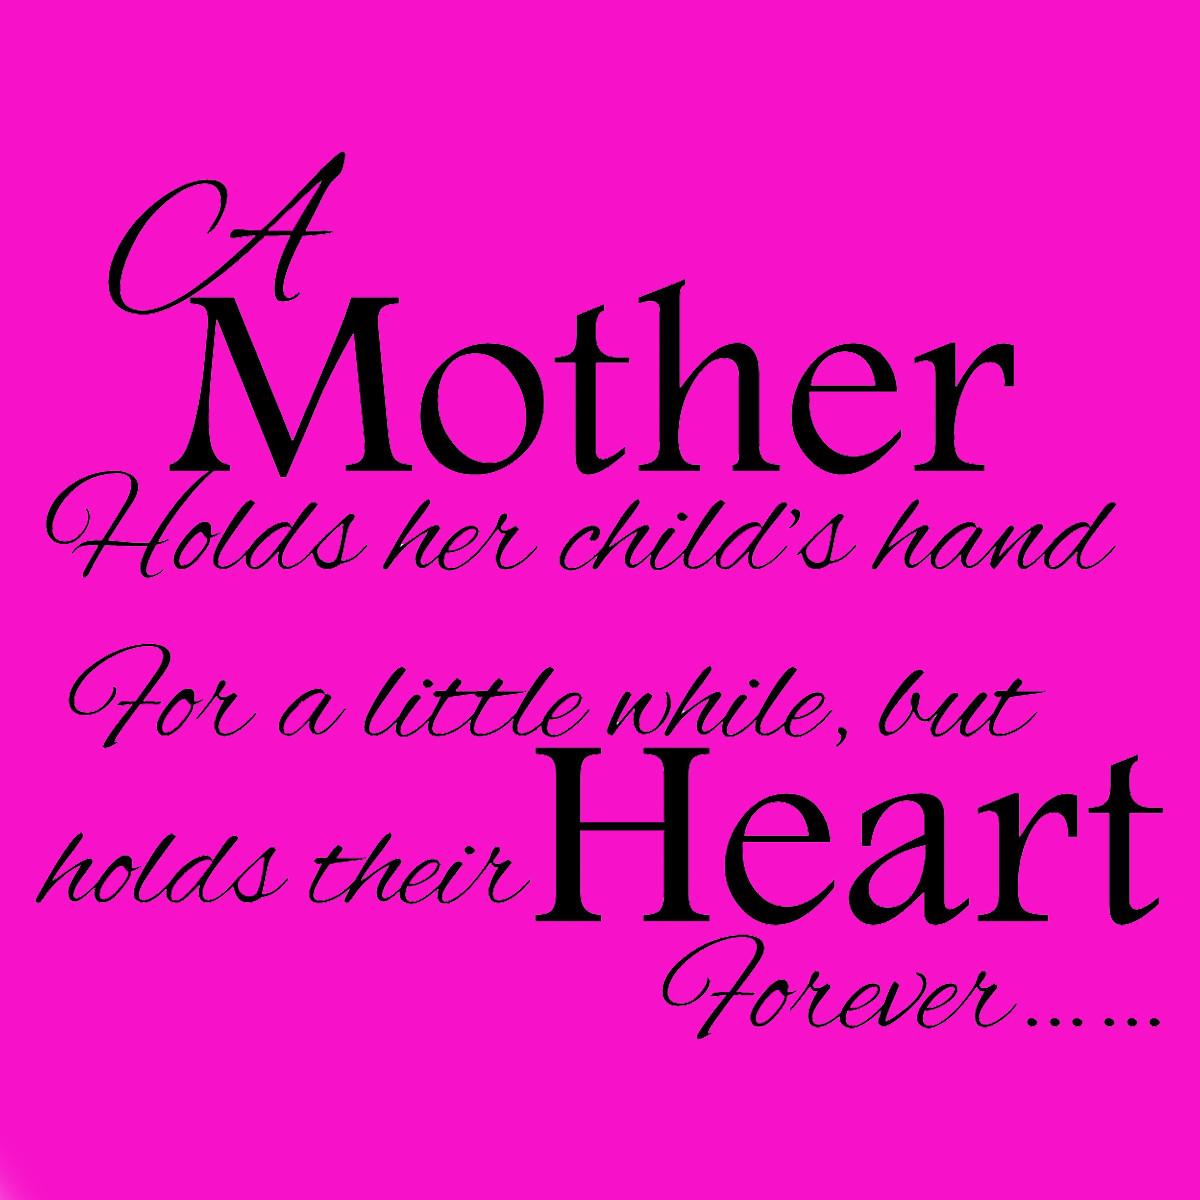 Quotes About Your Mother
 Mothers Day Quotes For QuotesGram